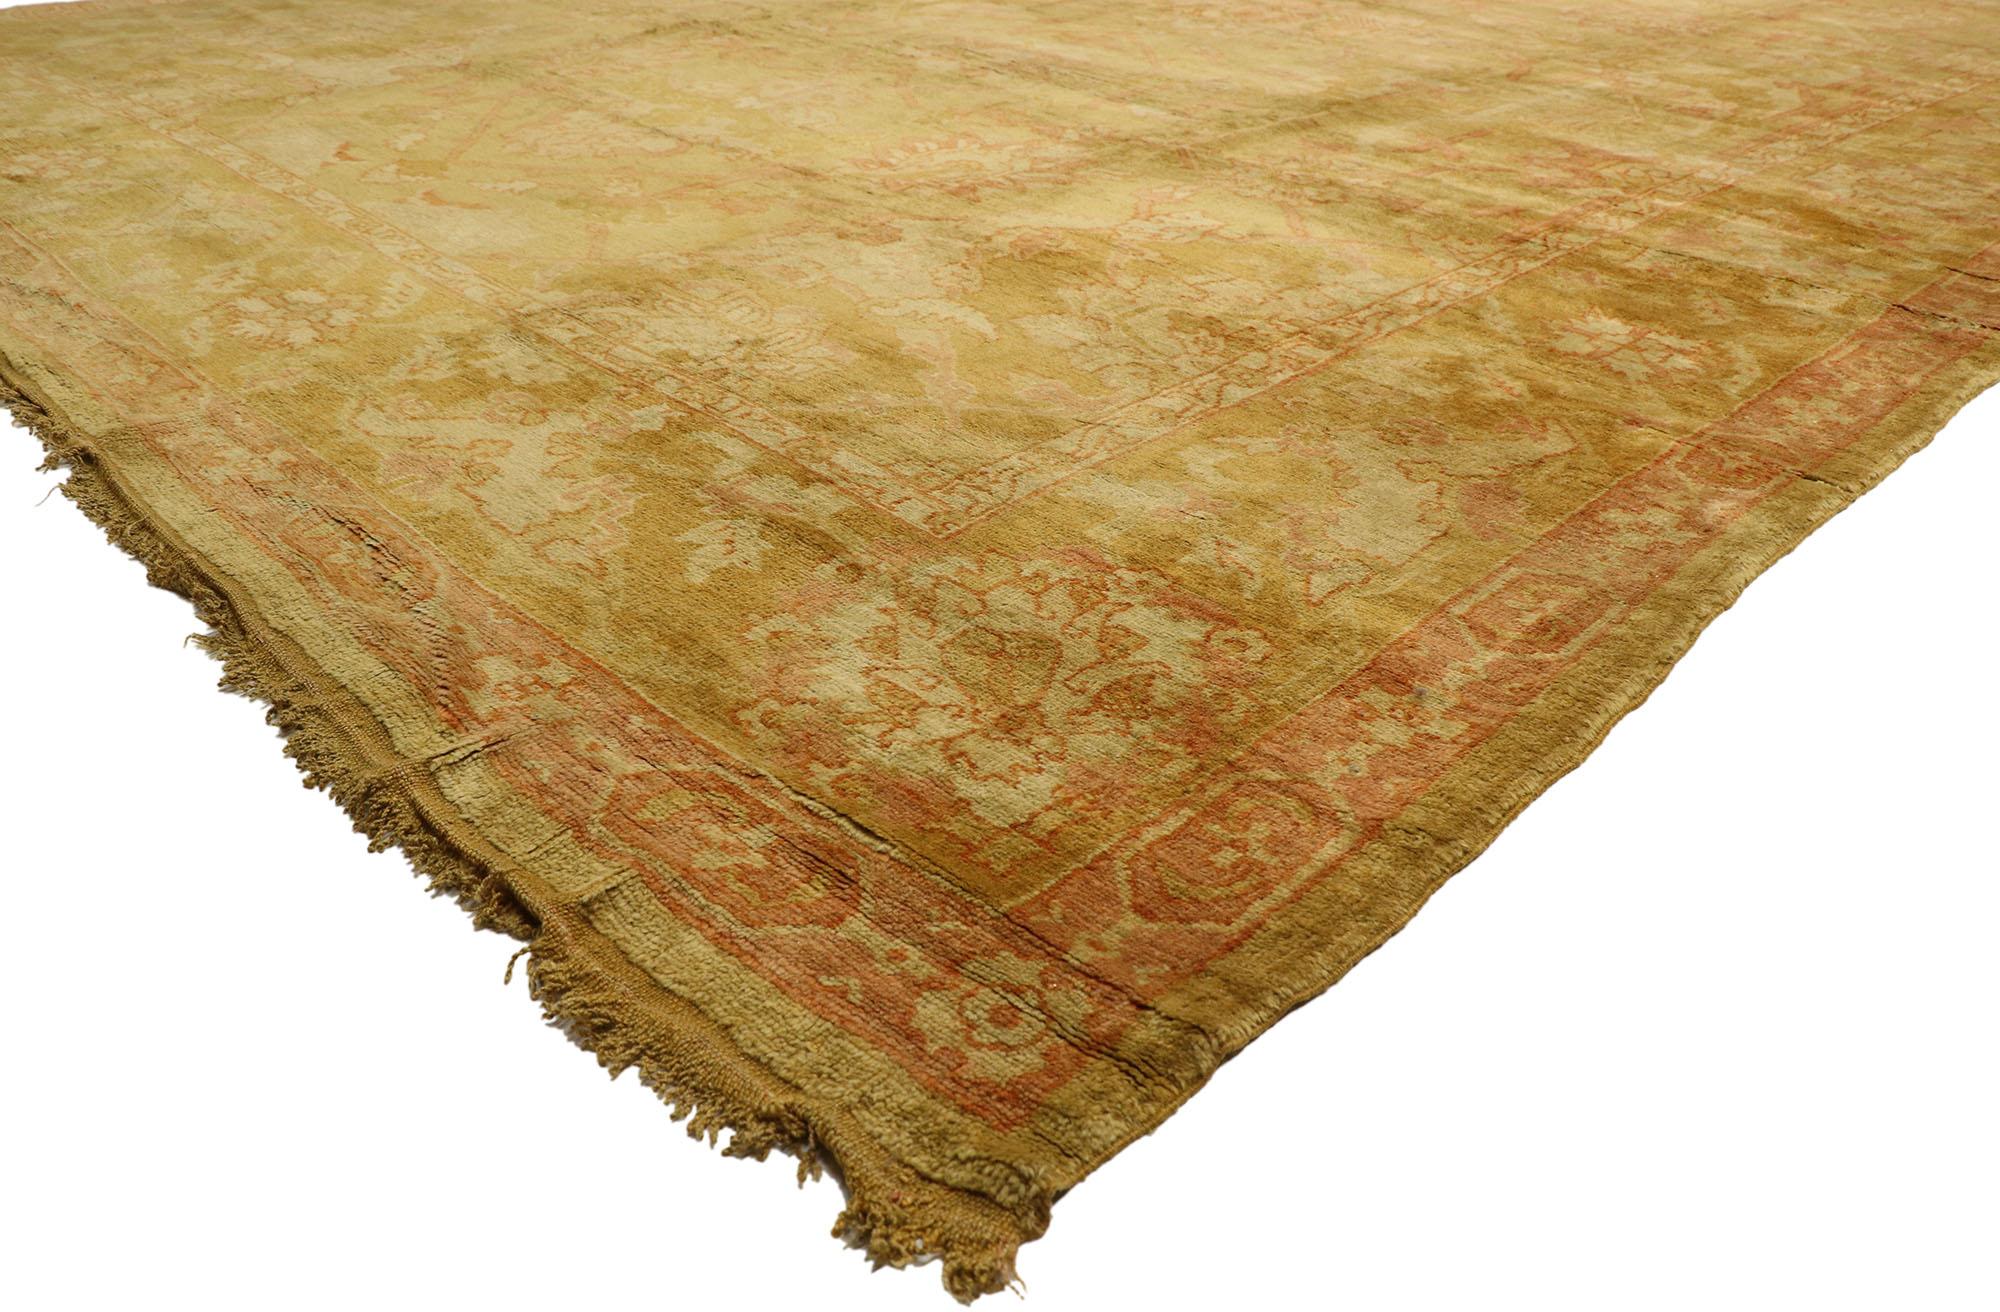 77441 late 19th century antique Turkish Oushak Palace rug with rustic Mediterranean style Emanating timeless elegance and warm, earthy colors, this hand knotted wool antique Turkish Oushak palace rug beautifully embodies a modern Mediterranean style